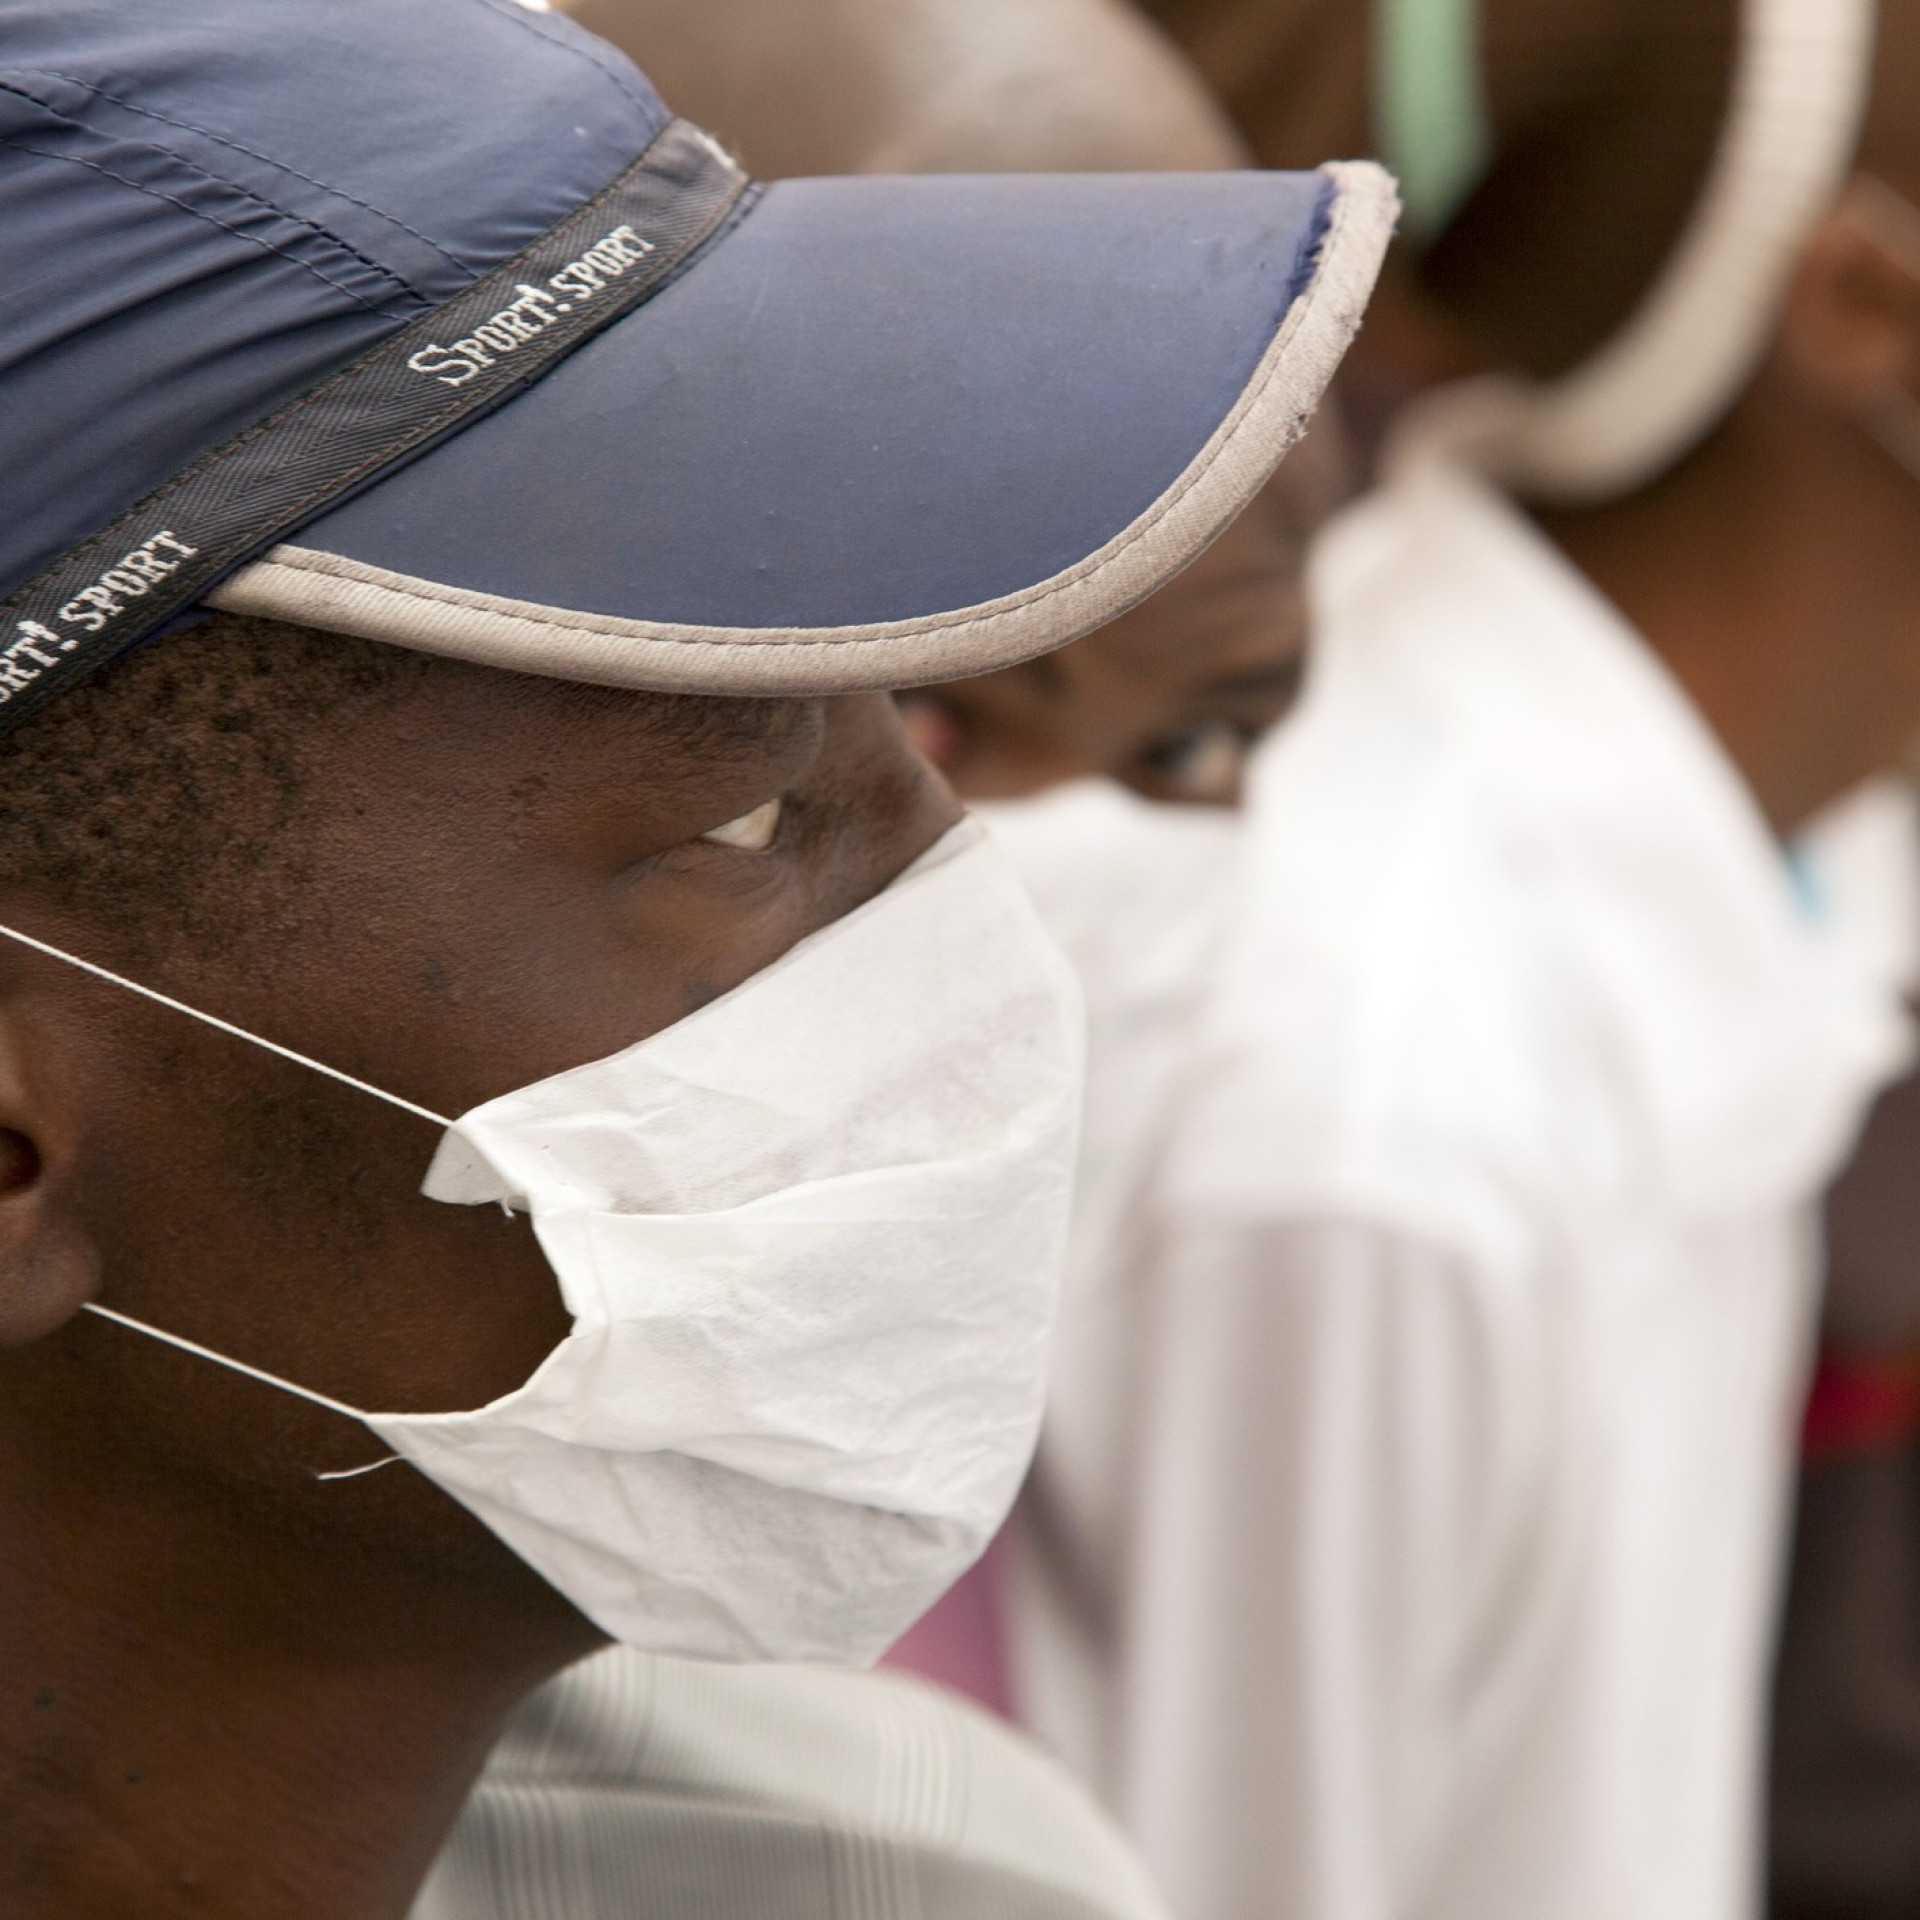 A TB patient wearing a mask demonstrating DMI's work with TB